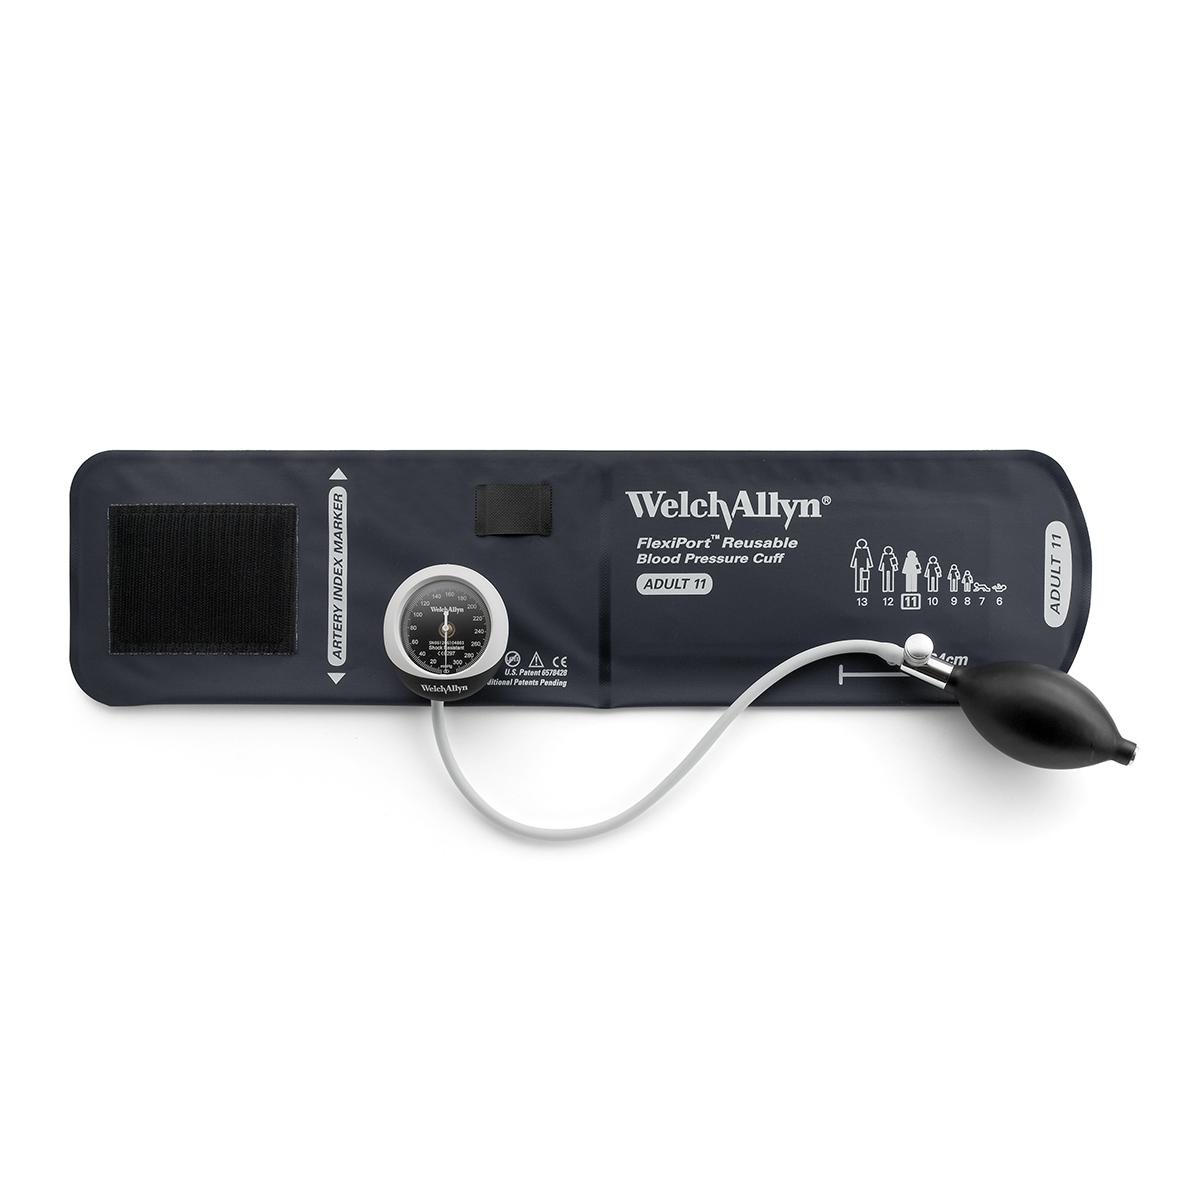 A Welch Allyn Silver Series DS45 Aneroid attached to an adult-sized, reusable FlexiPort blood pressure cuff.